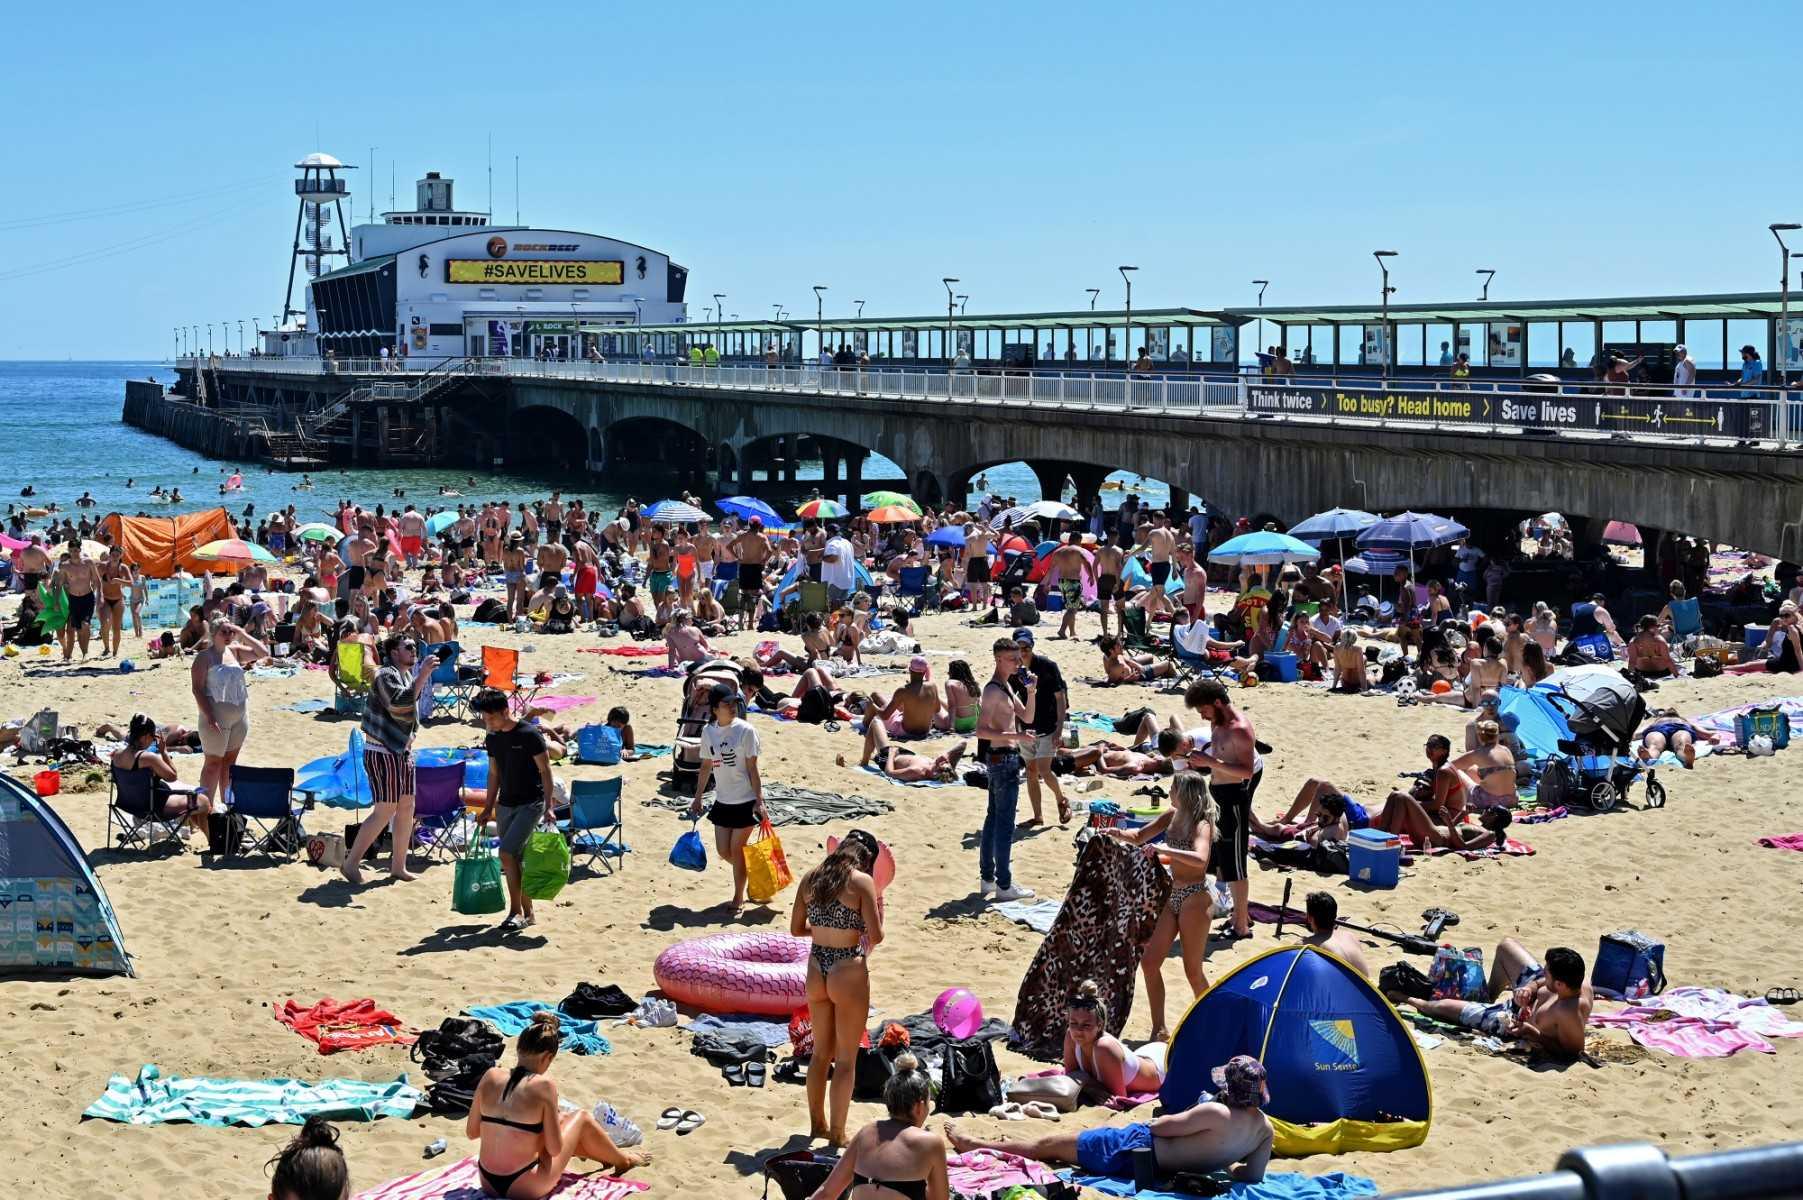 Beachgoers enjoy the sunshine as they sunbathe and play in the sea on Bournemouth beach in Bournemouth, southern England, on June 25, 2020. Photo: AFP